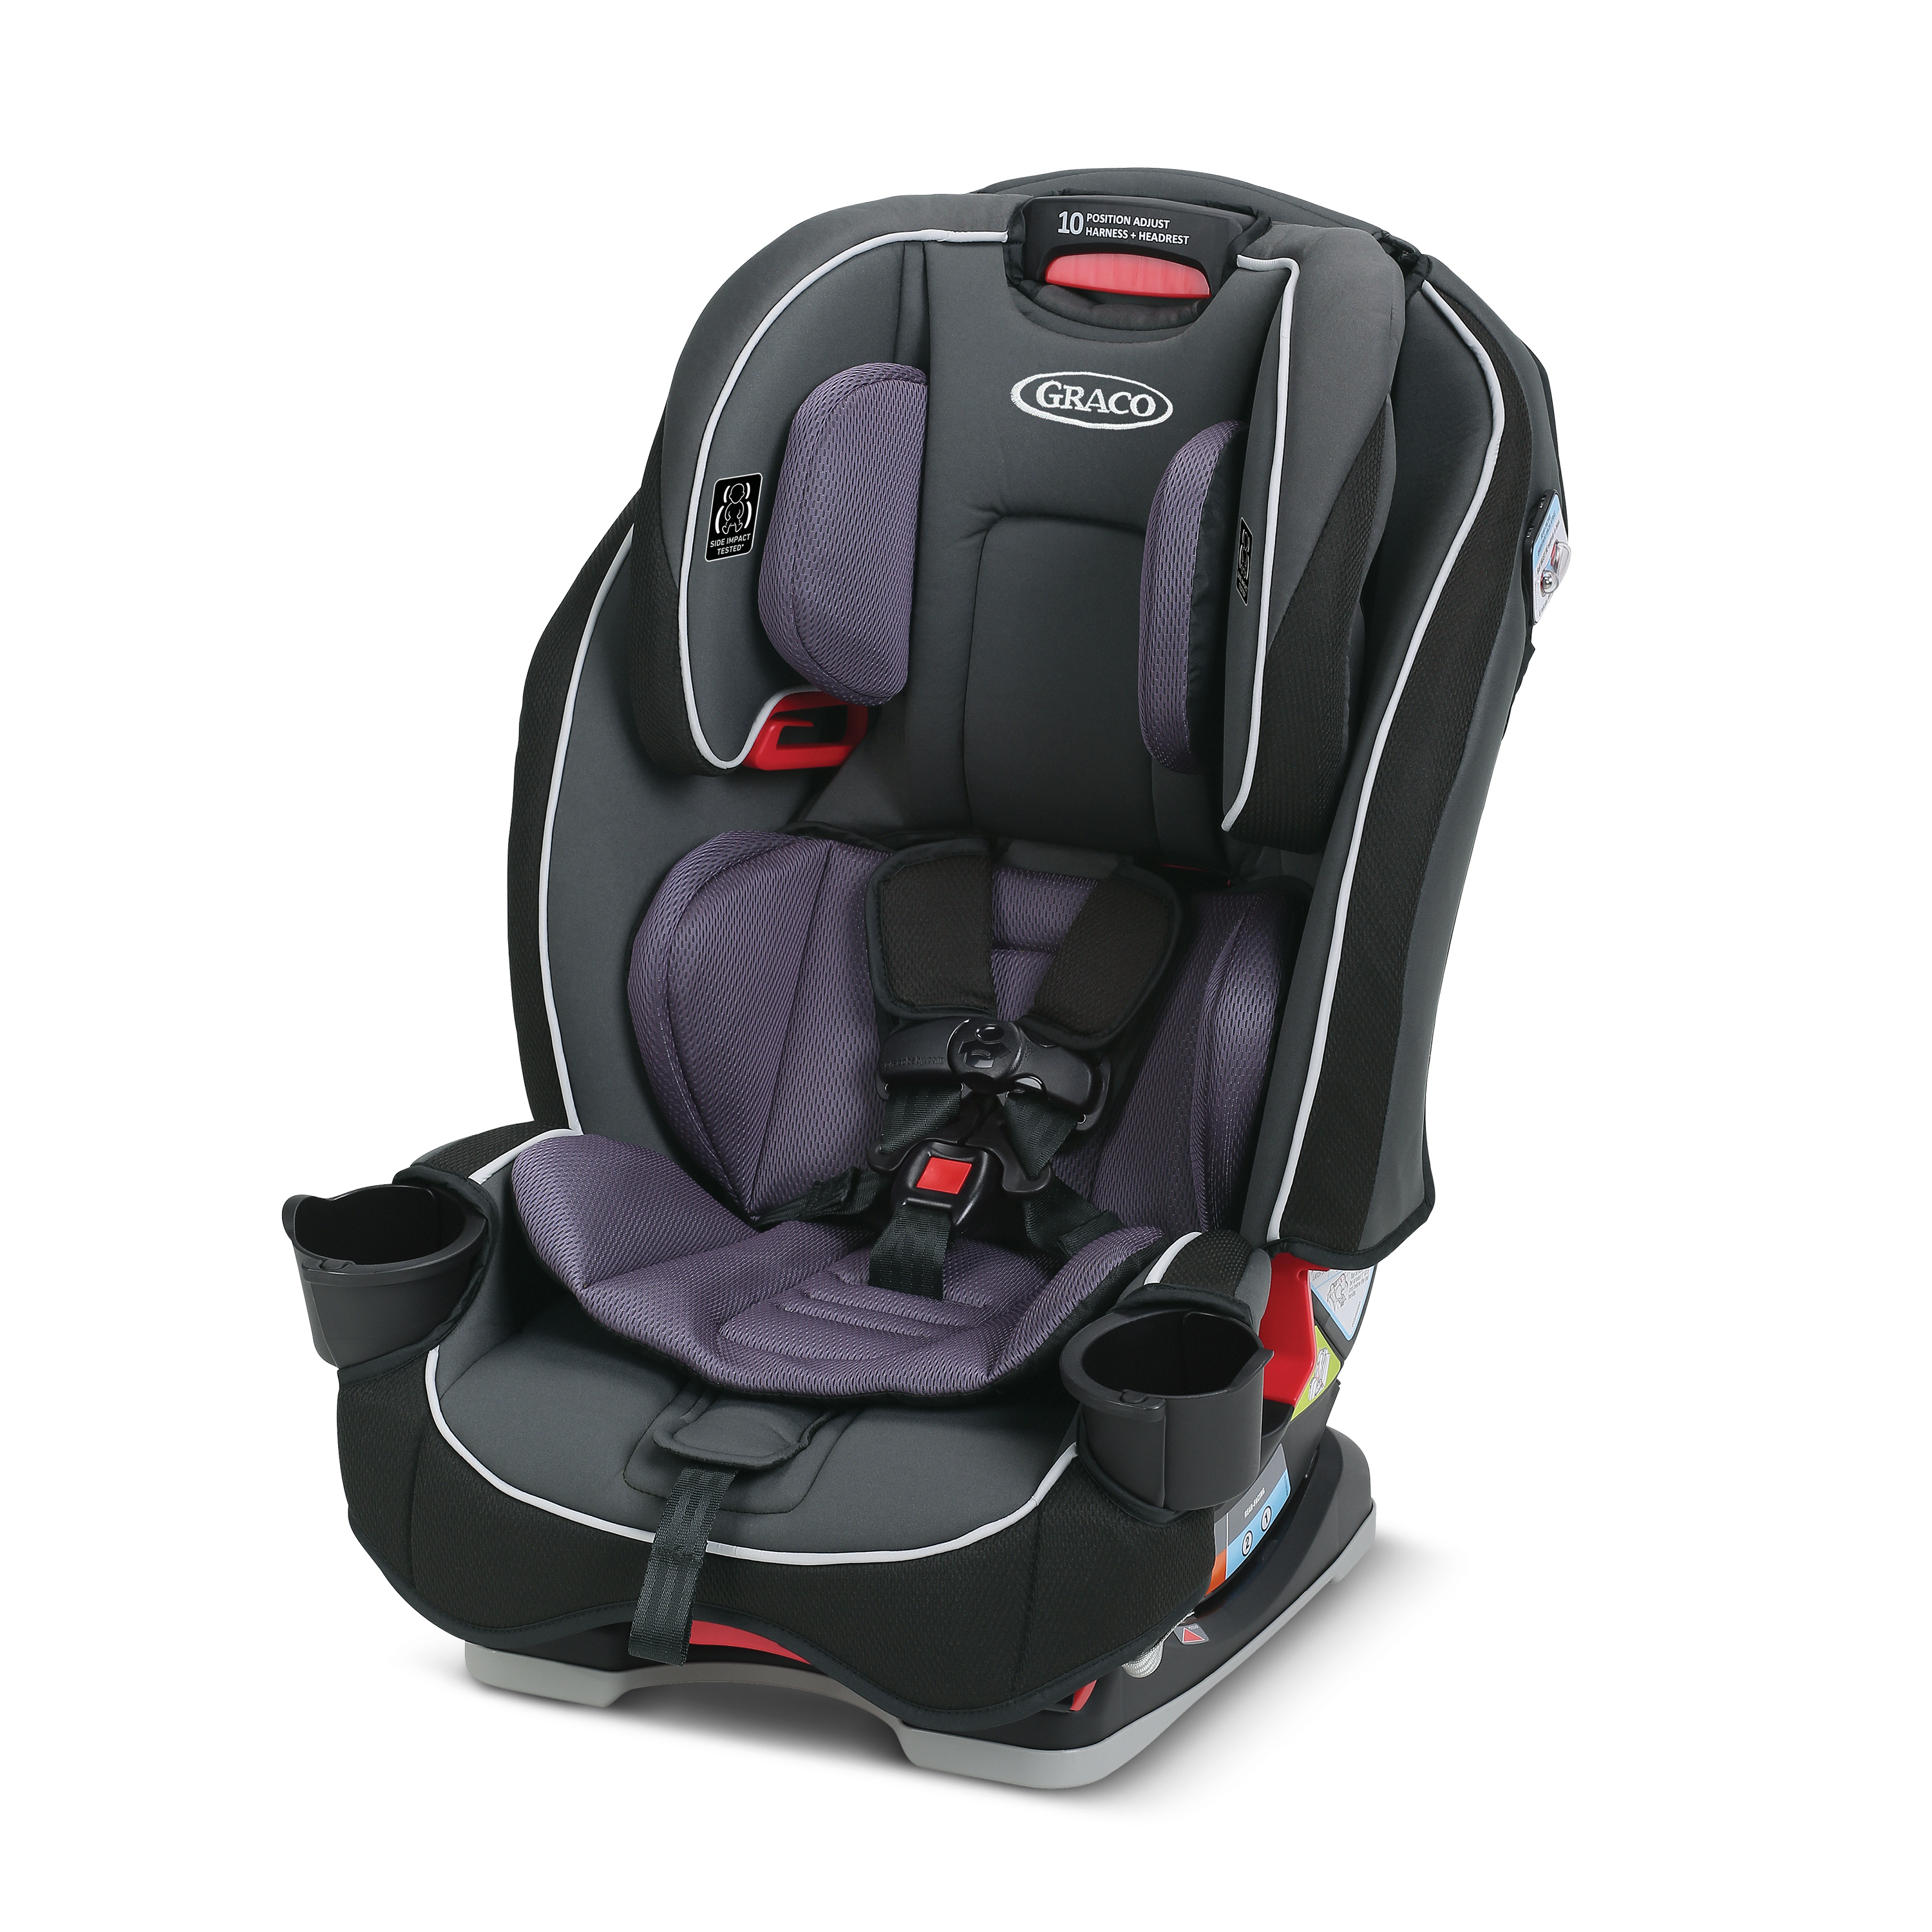 Graco SlimFit All-in-One Convertible Car Seat, Anabele Purple - image 1 of 13